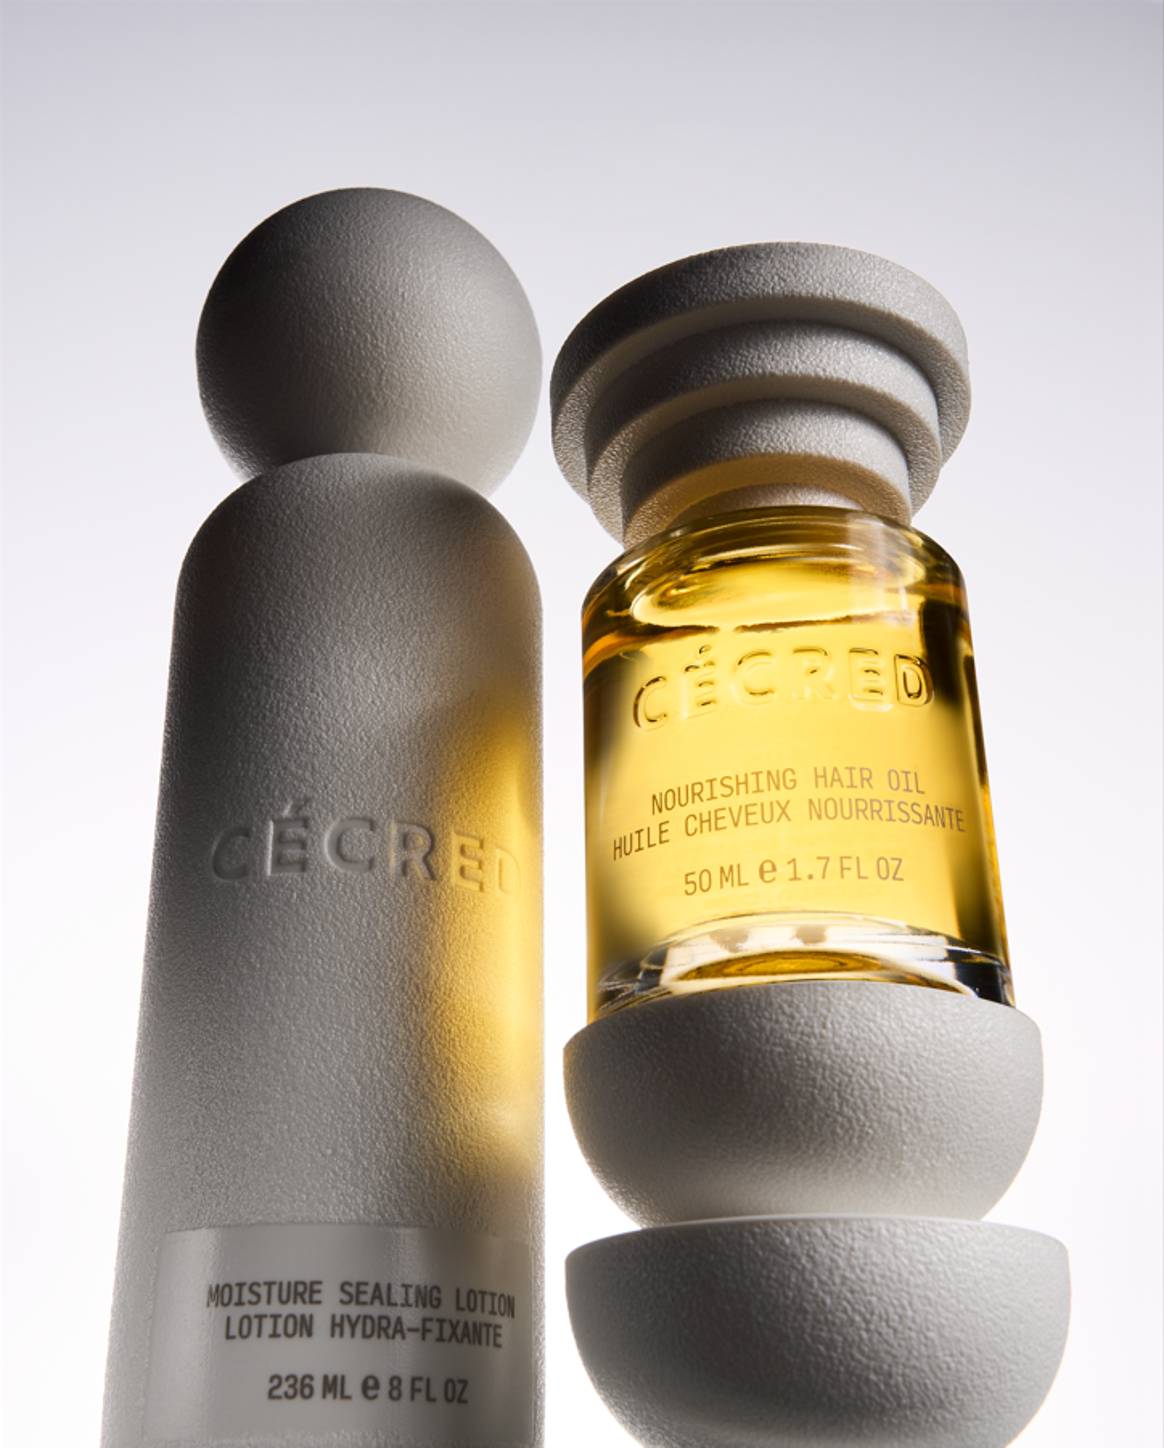 Cécred haircare brand from Beyoncé